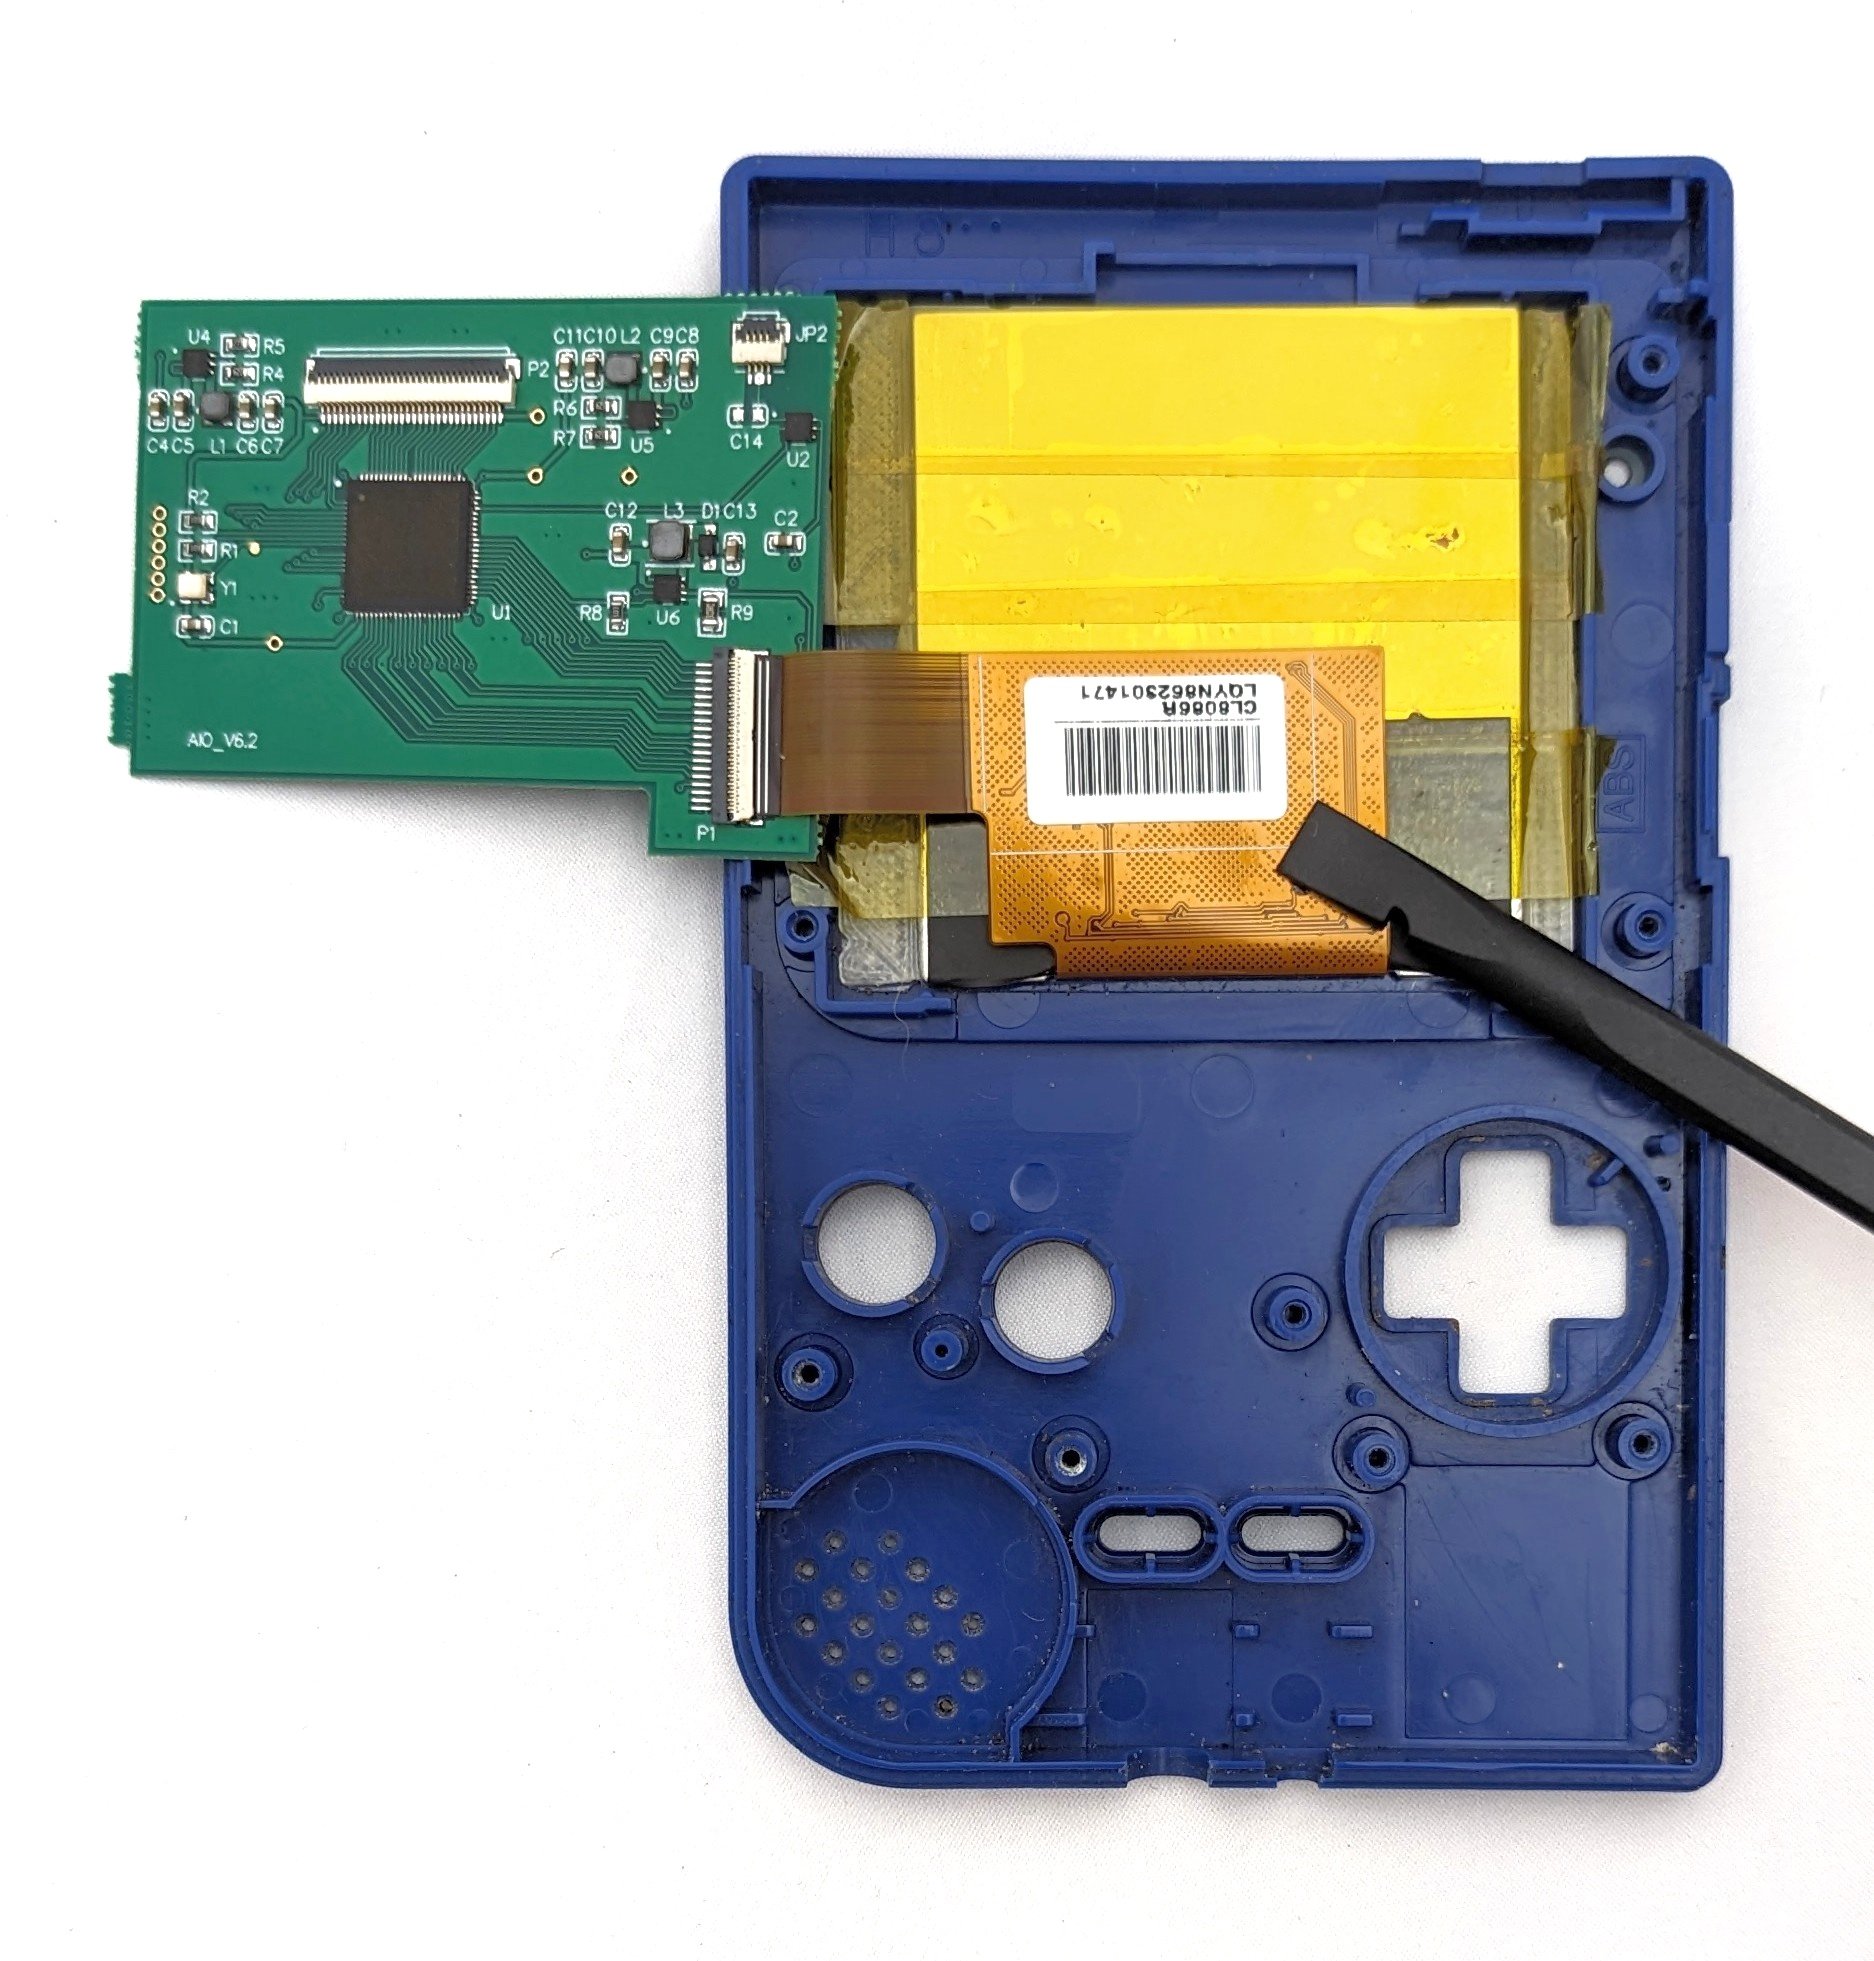 The inside shell of a game boy with a new screen implemented. A circuit board hangs off the side.